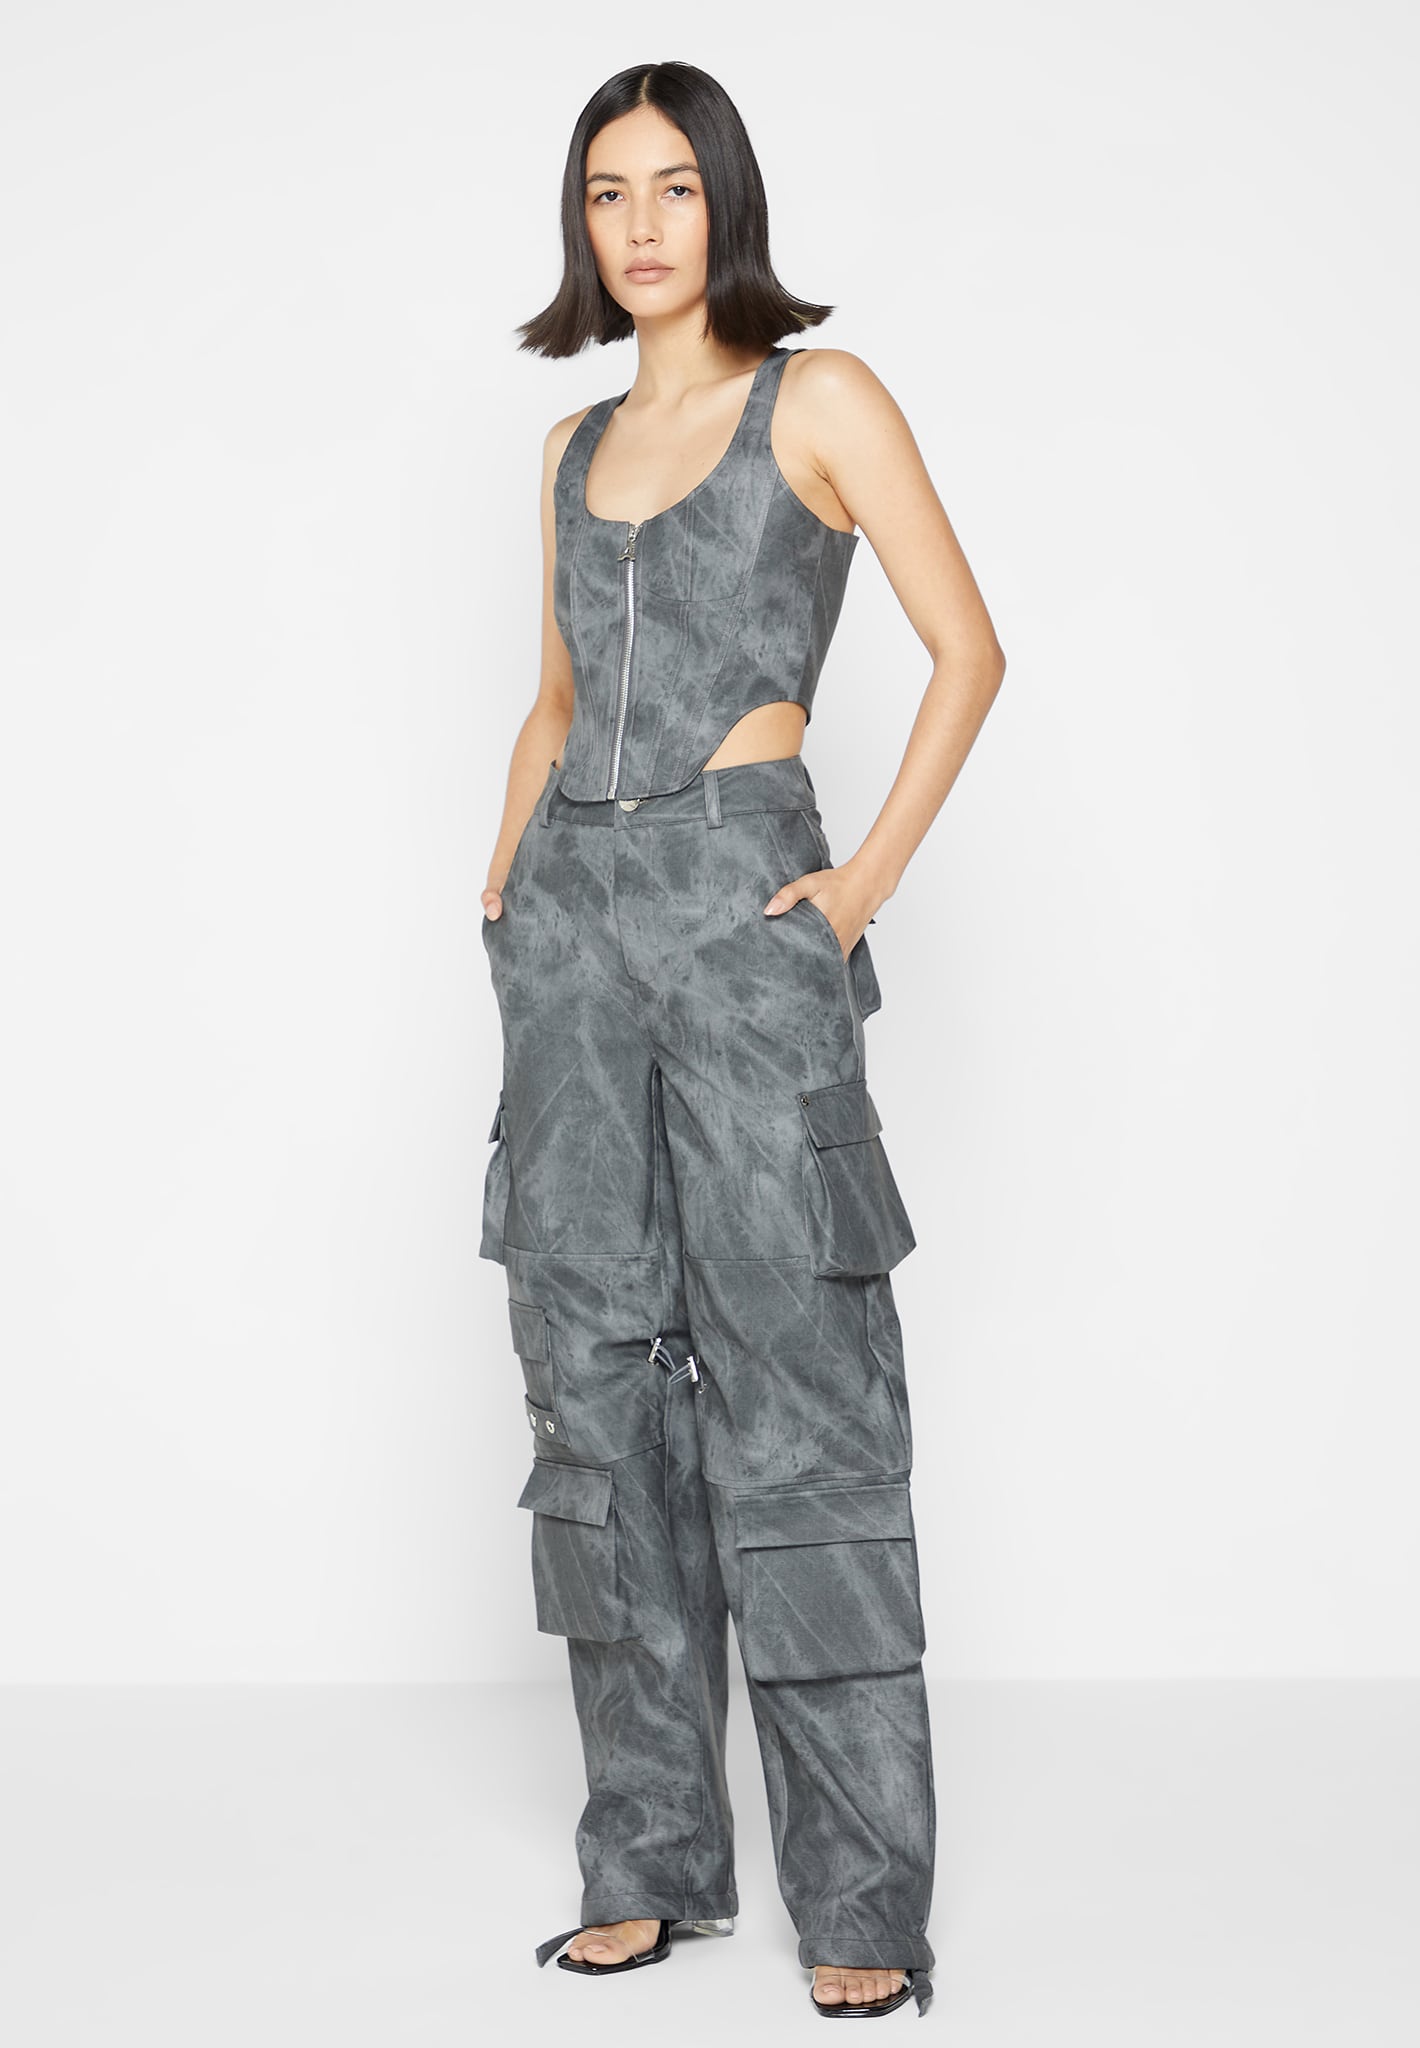 high-waisted-vintage-marble-leather-cargo-pants-washed-grey